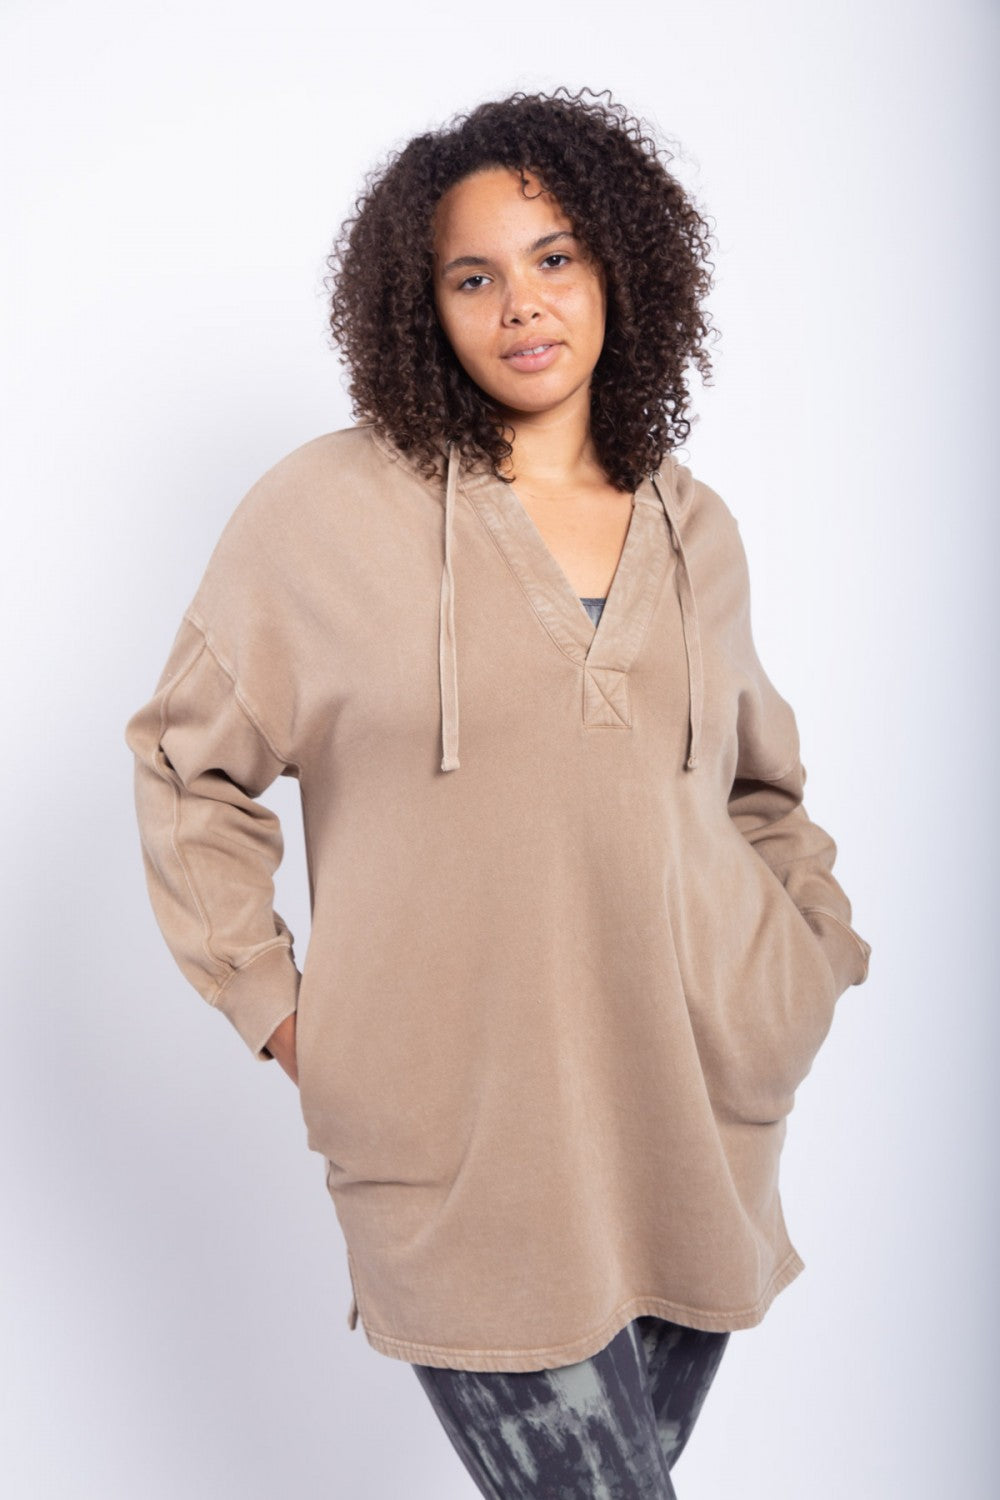 PLUS Mineral Washed Pullover